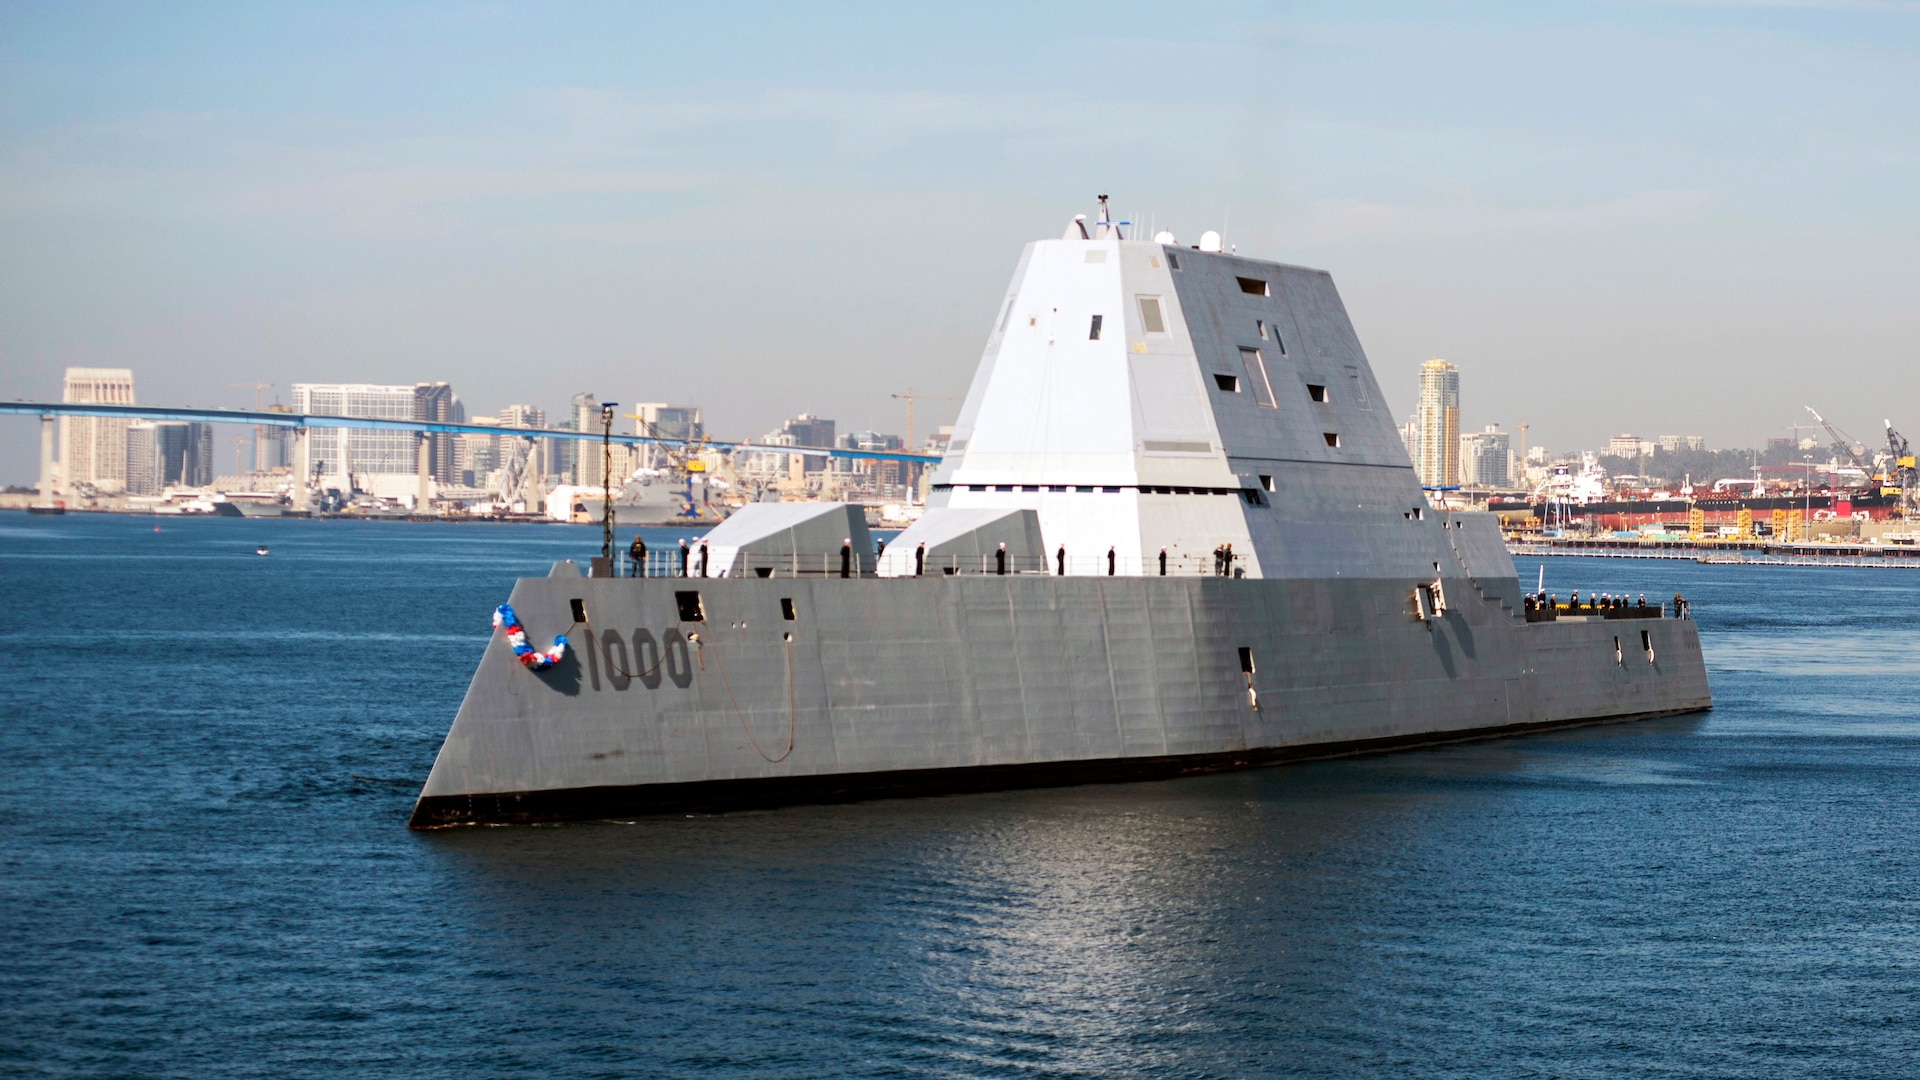 Navy Accepts Delivery Of Destroyer USS Zumwalt > U.S. Indo Pacific Command > 2015